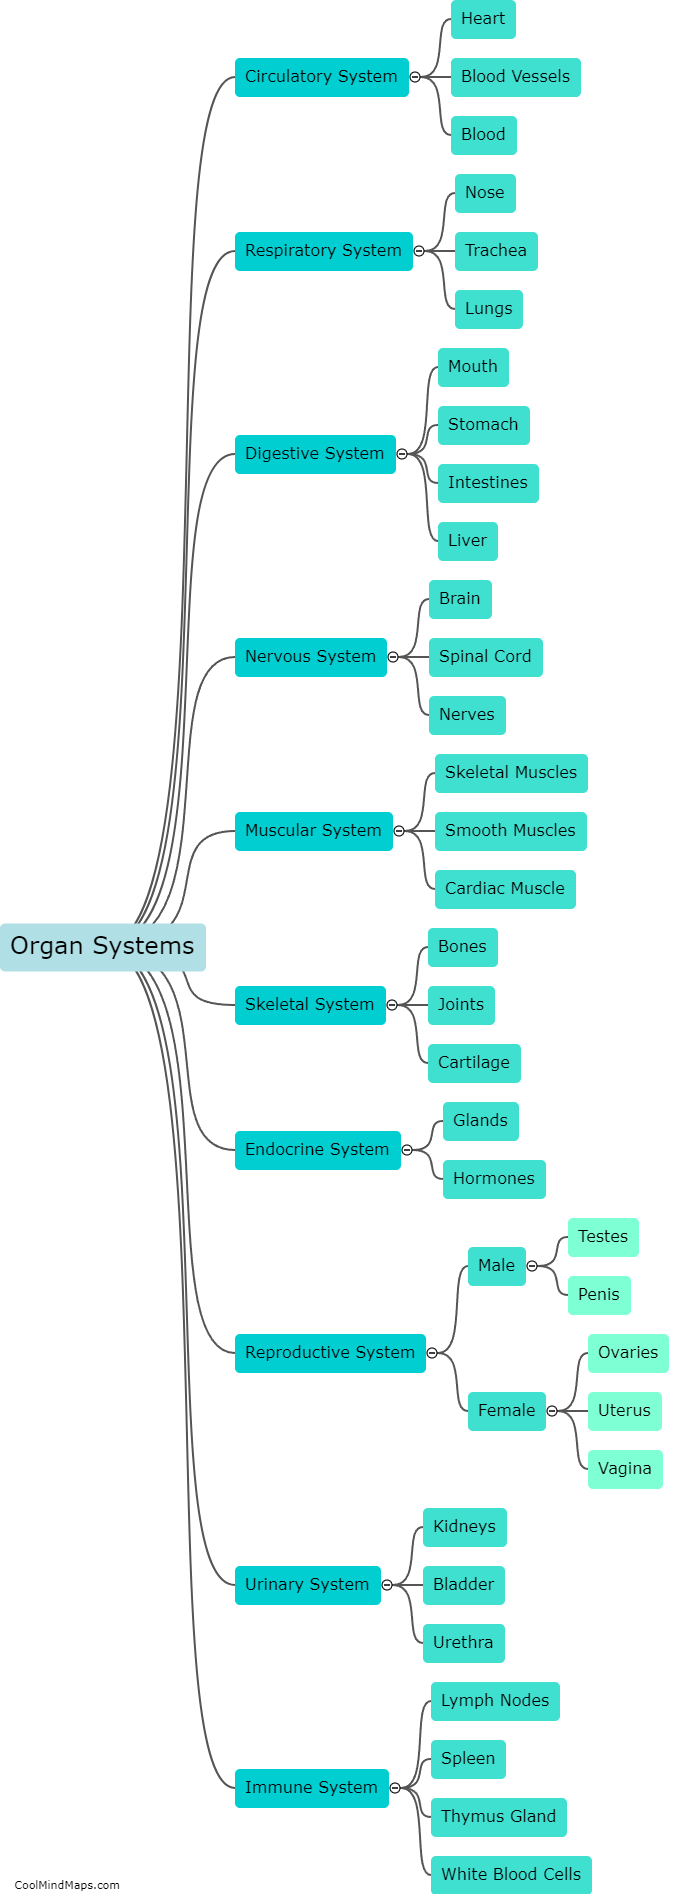 What are the major organ systems?